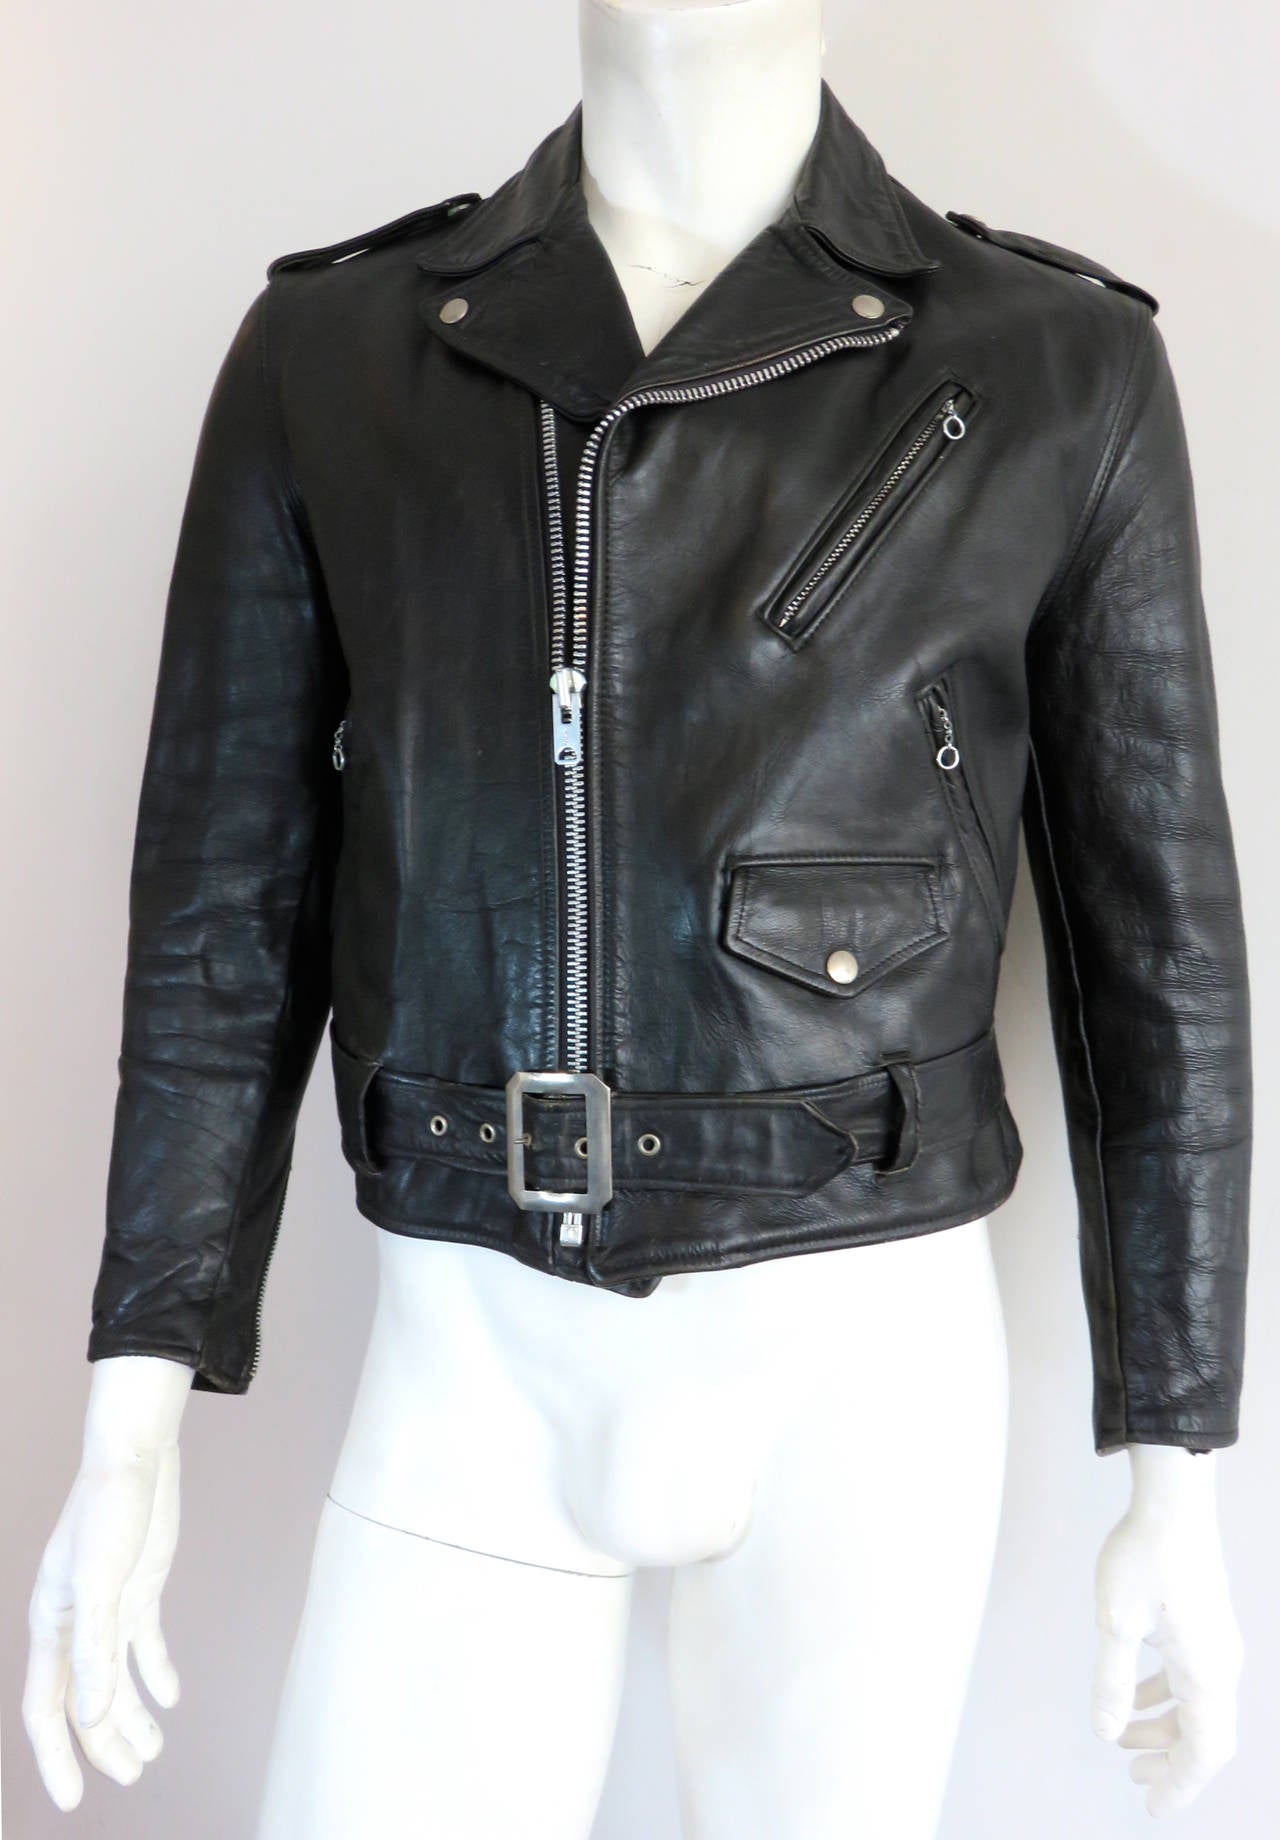 Great condition, 1960's SCHOTT BROS. USA Men's Perfecto leather motorcycle jacket.

This iconic American jacket features thick, black leather skin, and nickel metal hardware details, all original from the 1960's.  

Talon engraved, zipper front